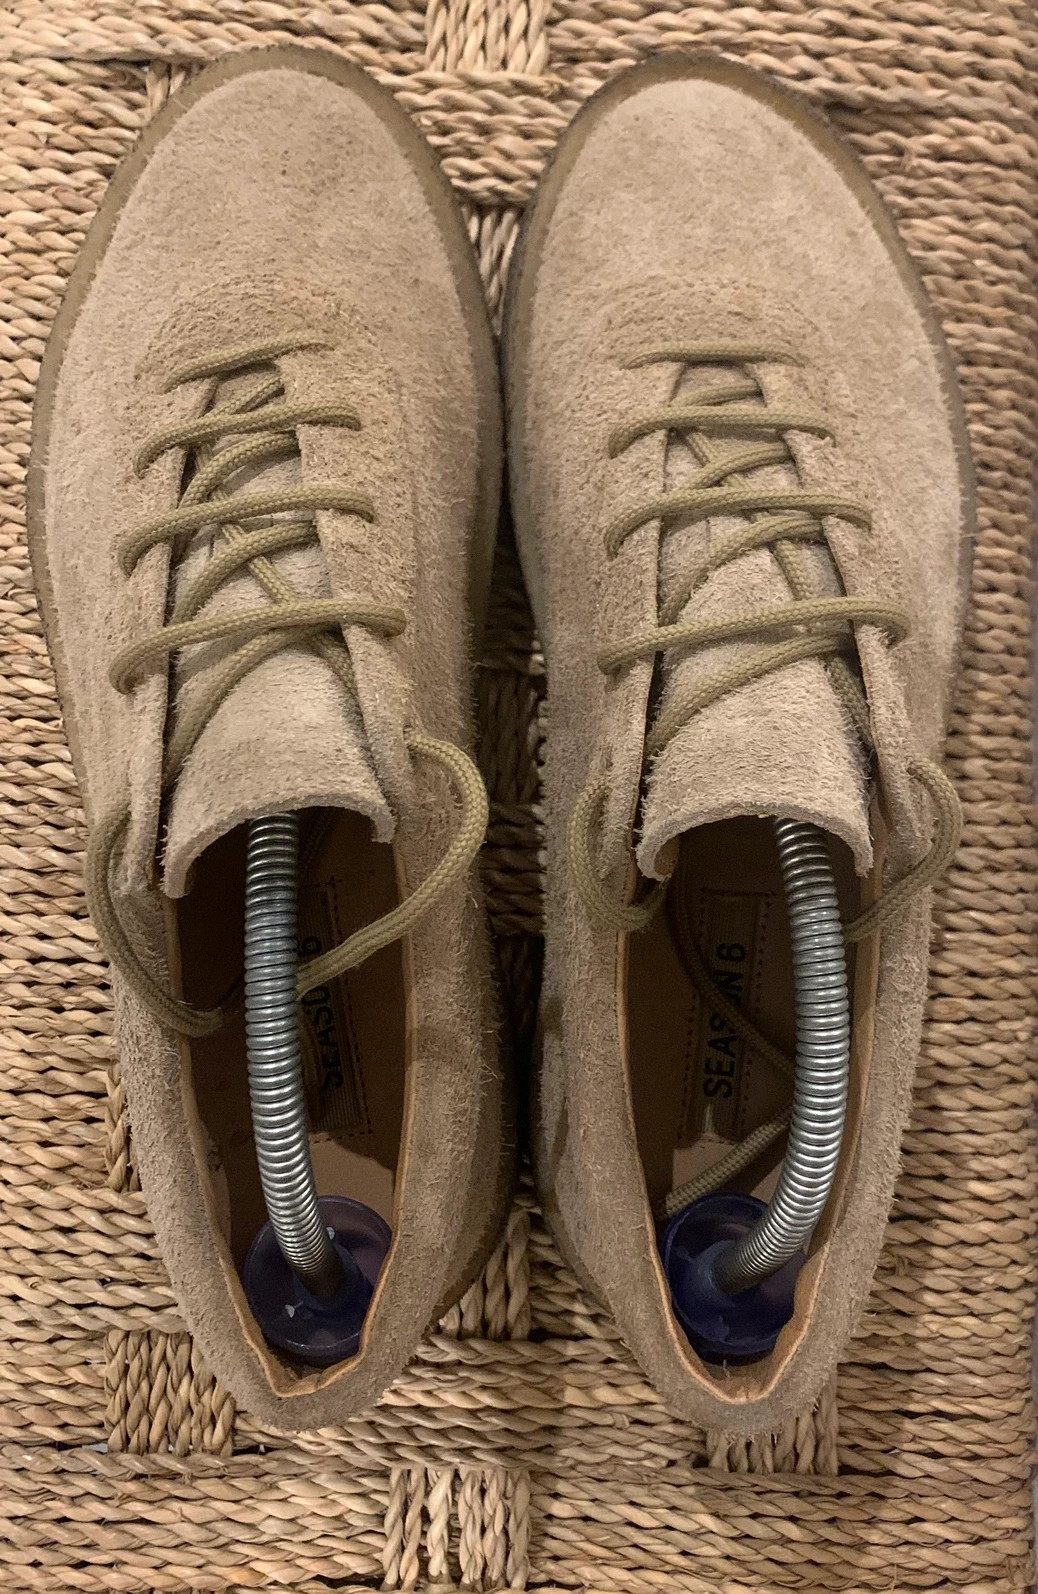 Yeezy Crepe Sneaker Season 6 Thick Shaggy Suede Taupe | Vinted